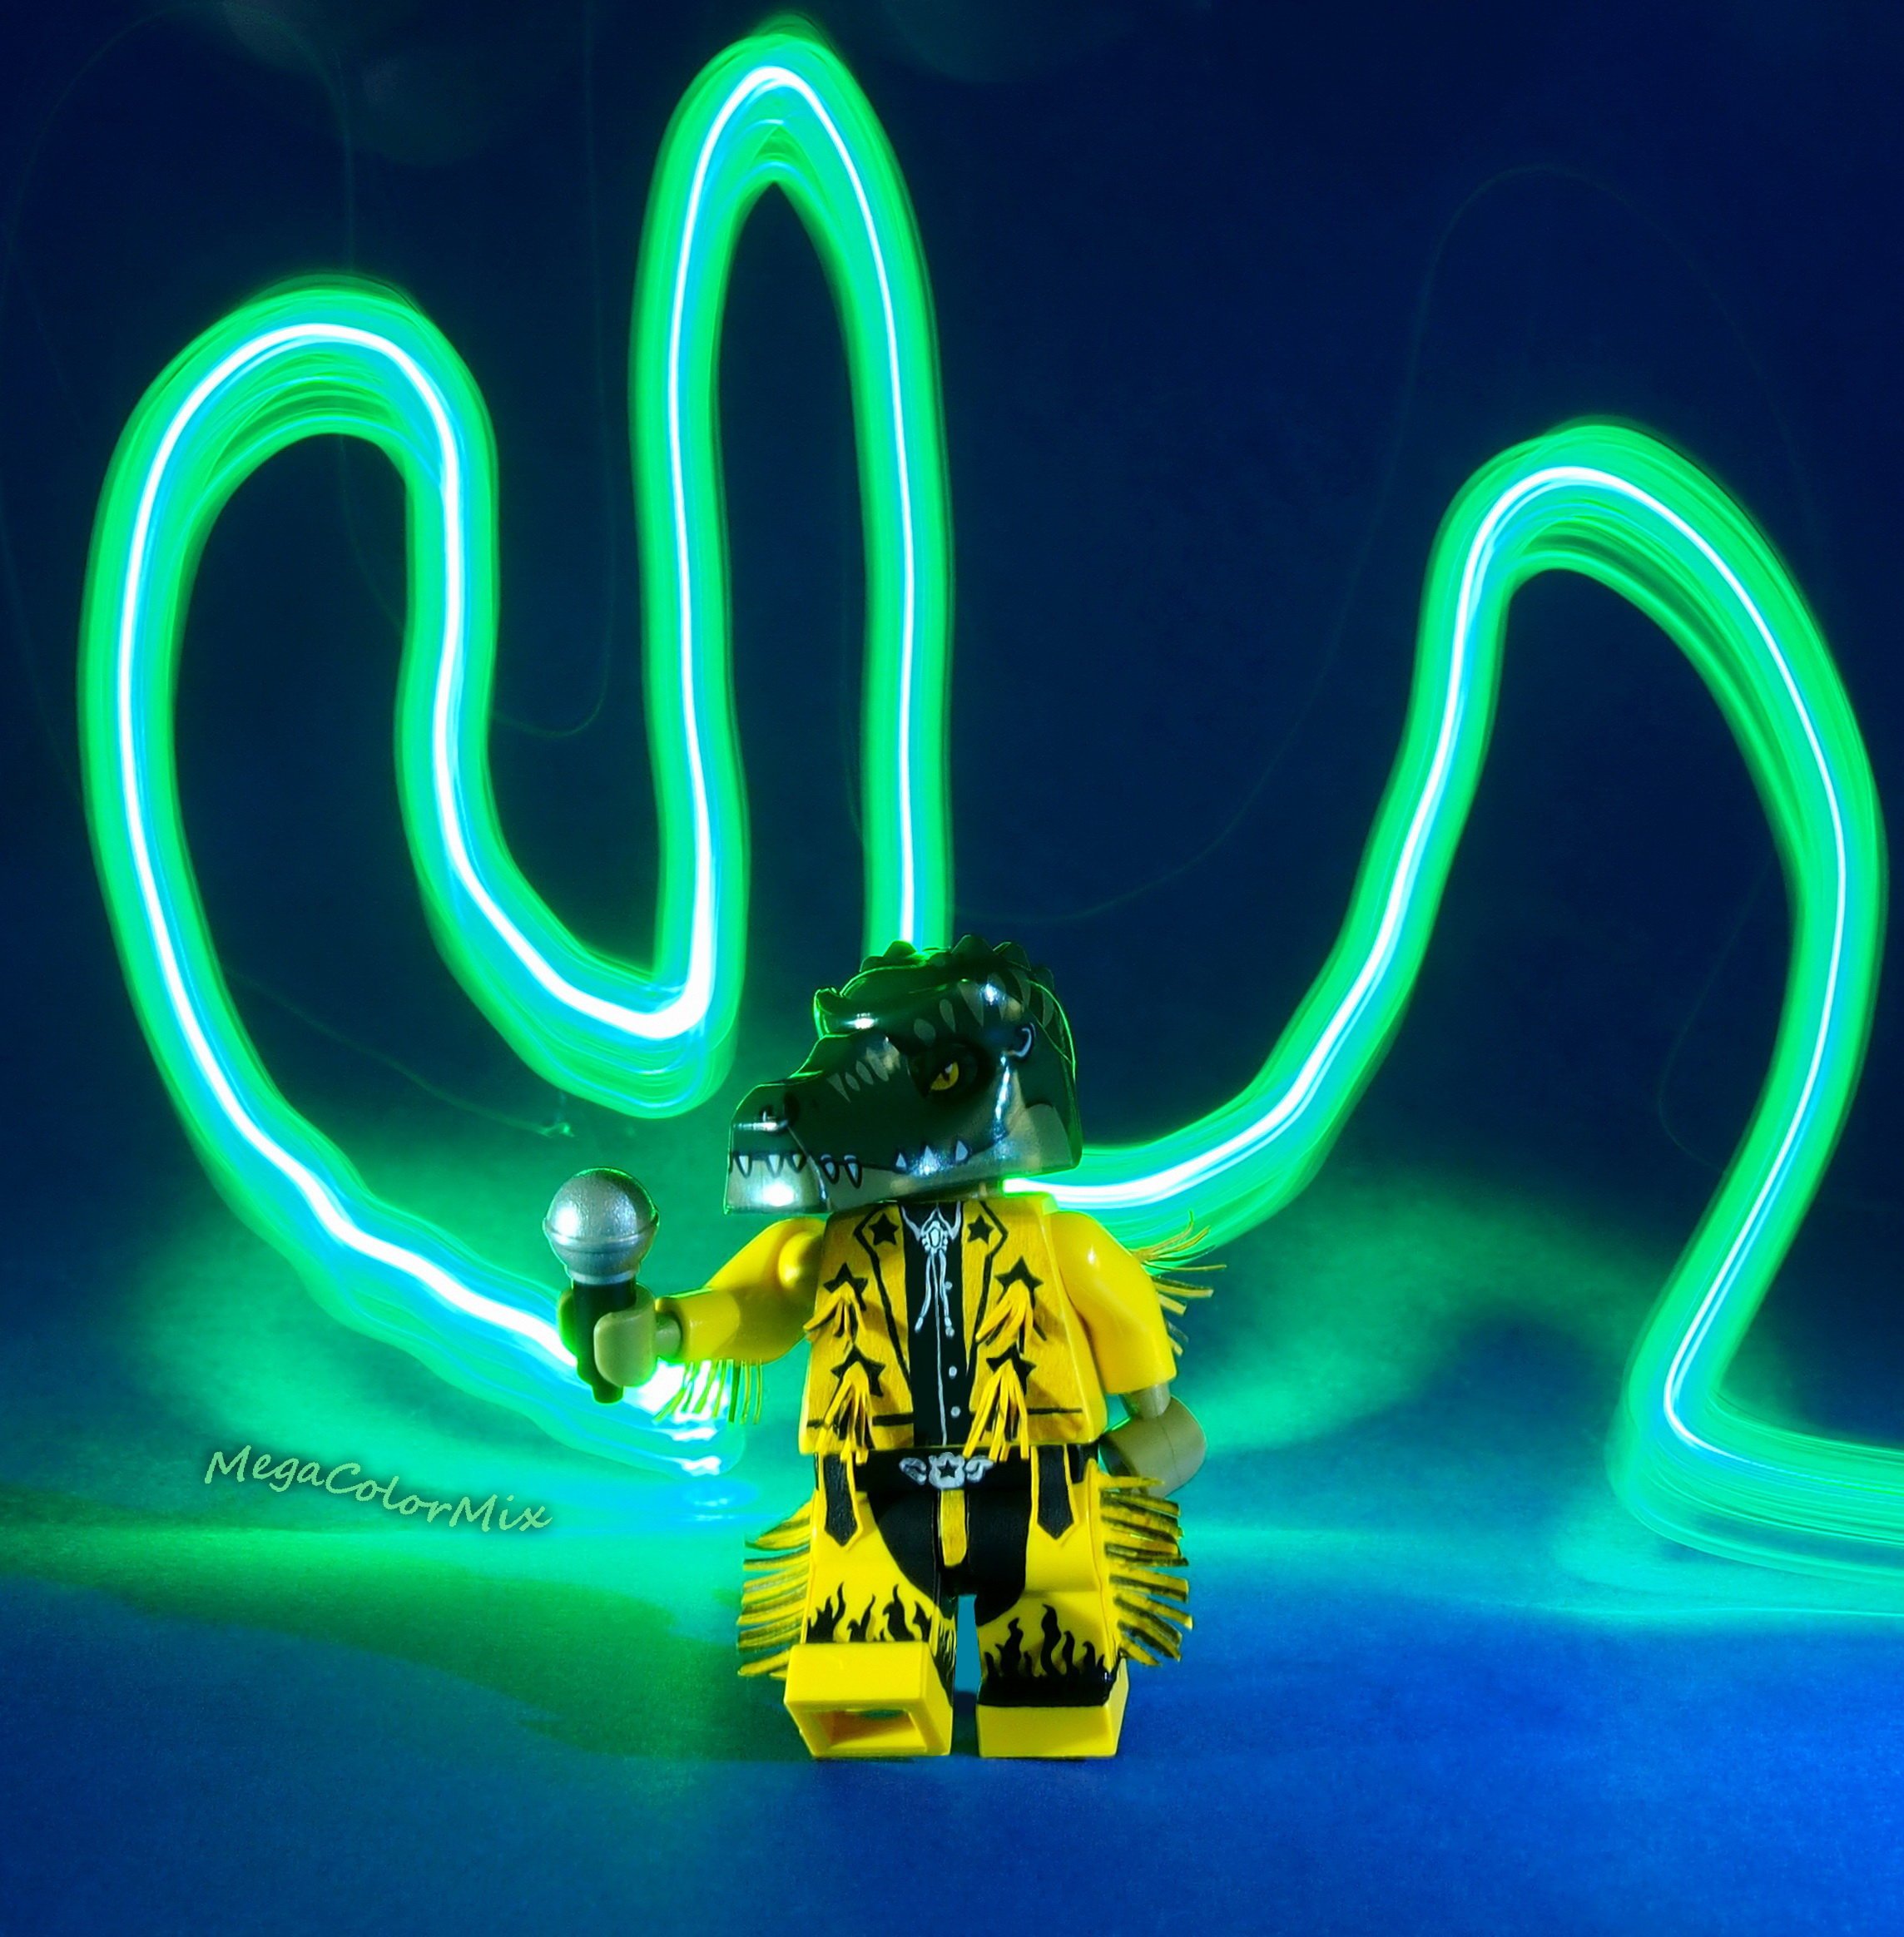 Light Painting: Add a Little Magic to Your LEGO Photos - BrickNerd - All  things LEGO and the LEGO fan community